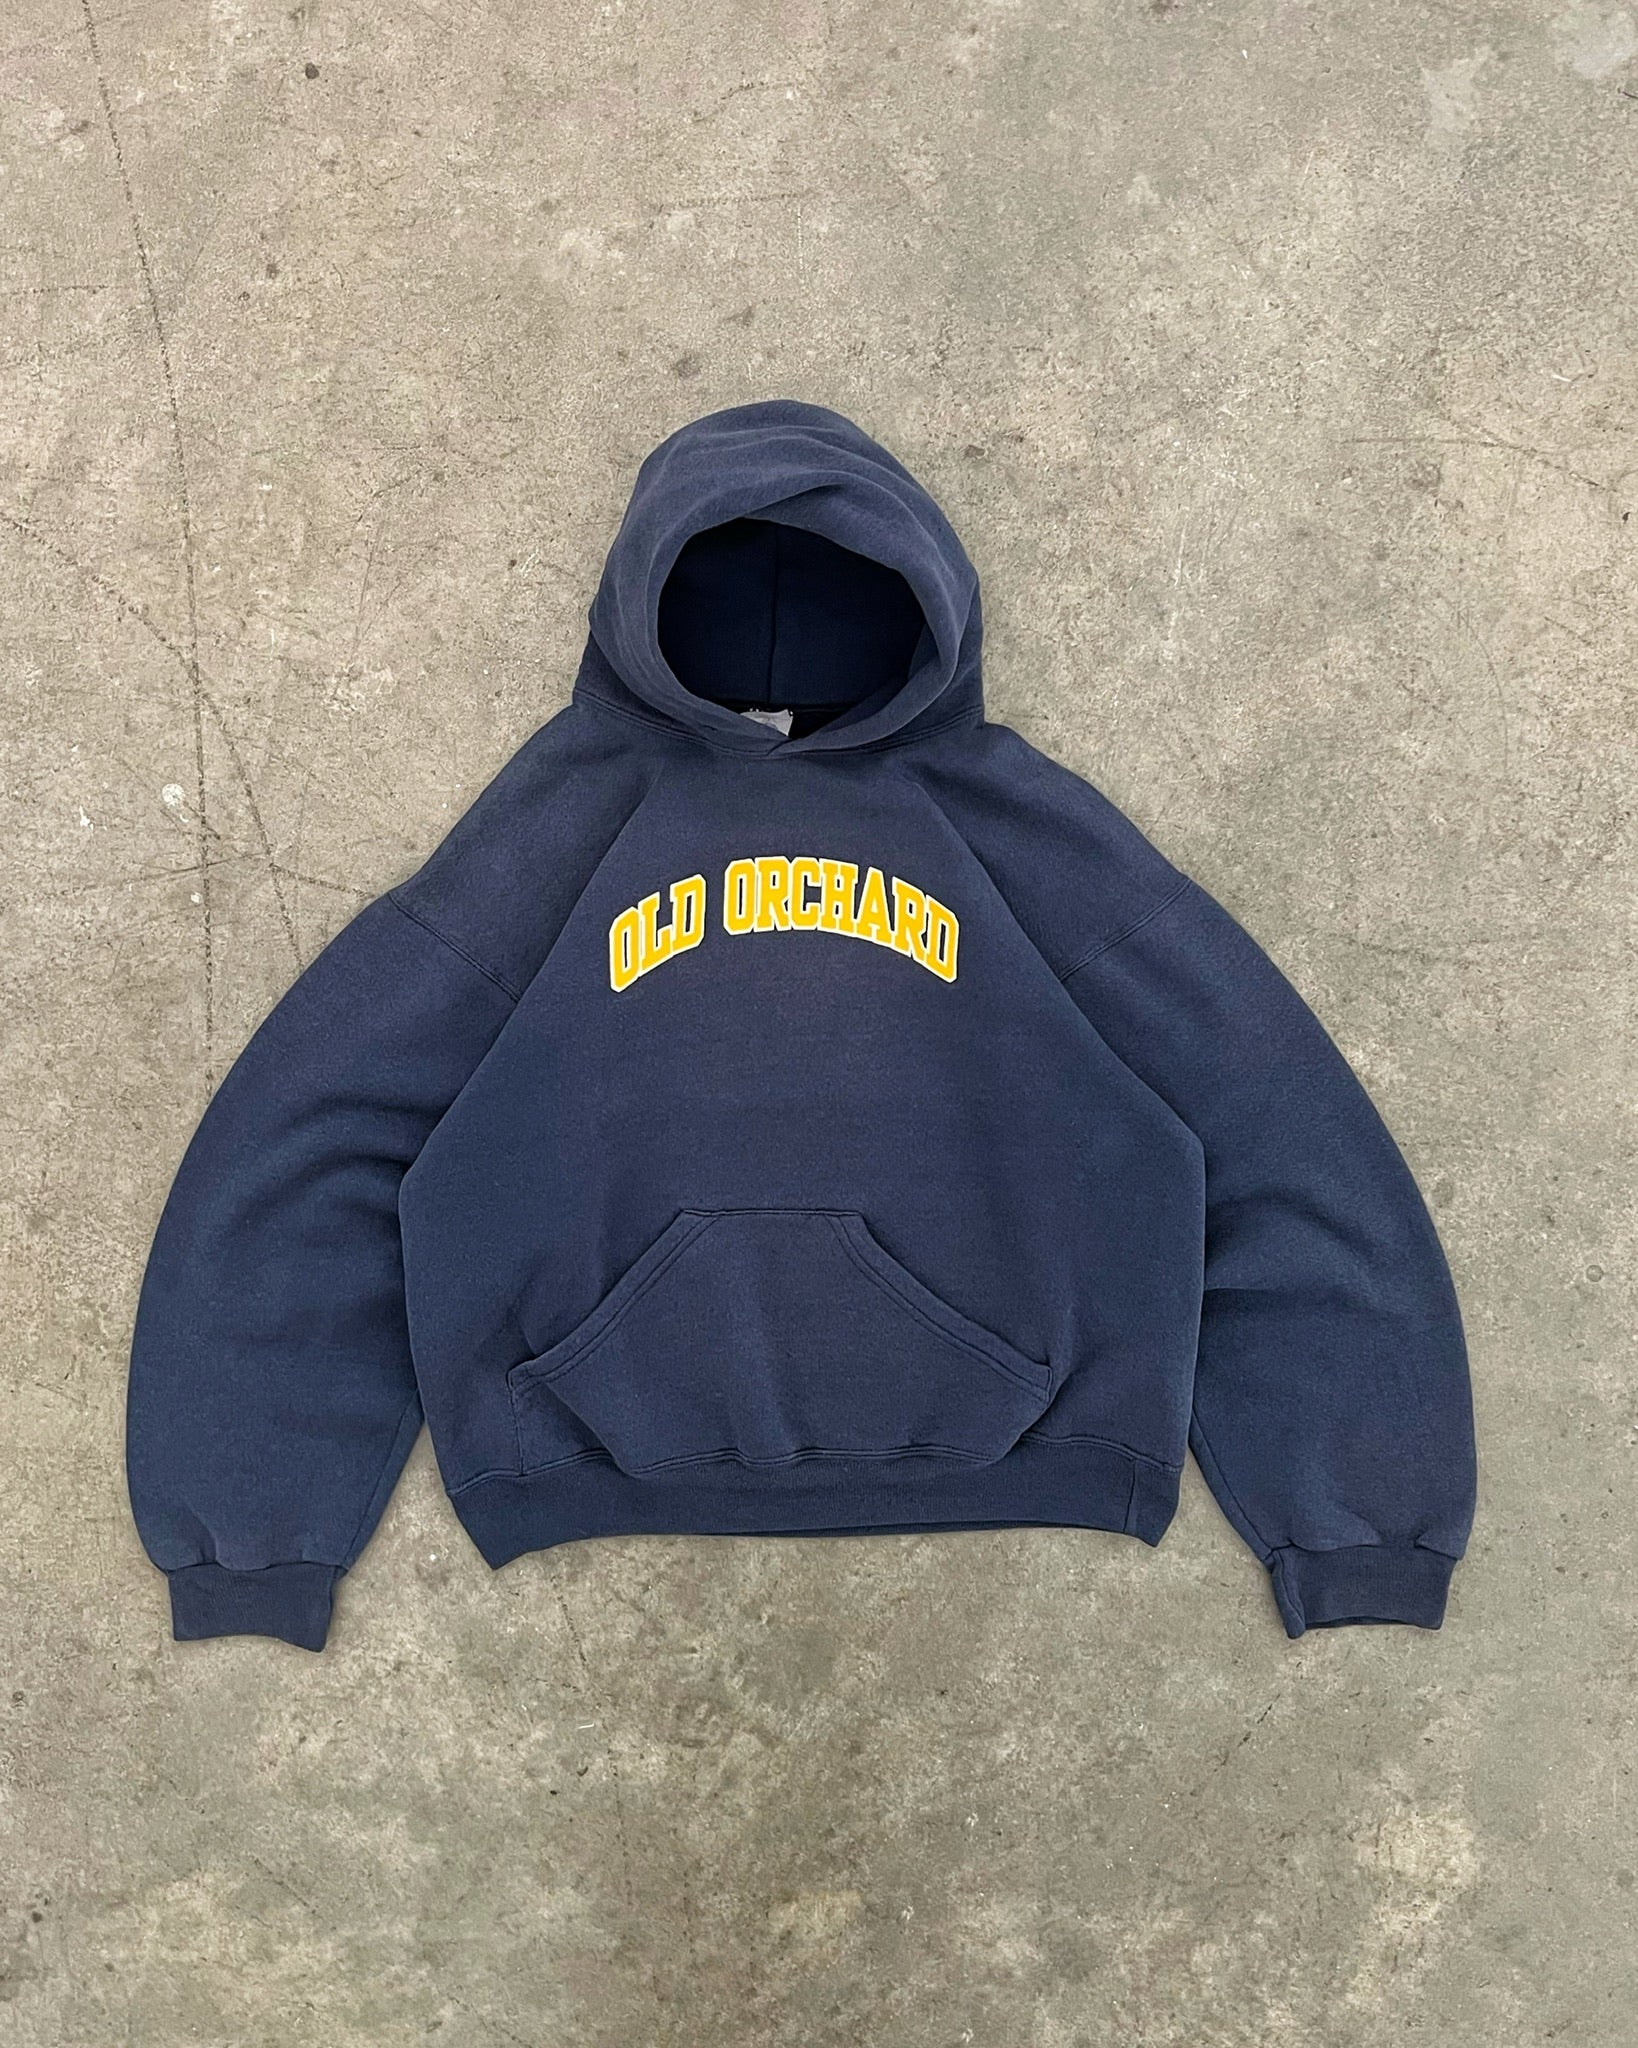 SUN FADED NAVY BLUE “OLD ORCHARD” HOODIE - 1990S – AKIMBO CLUB